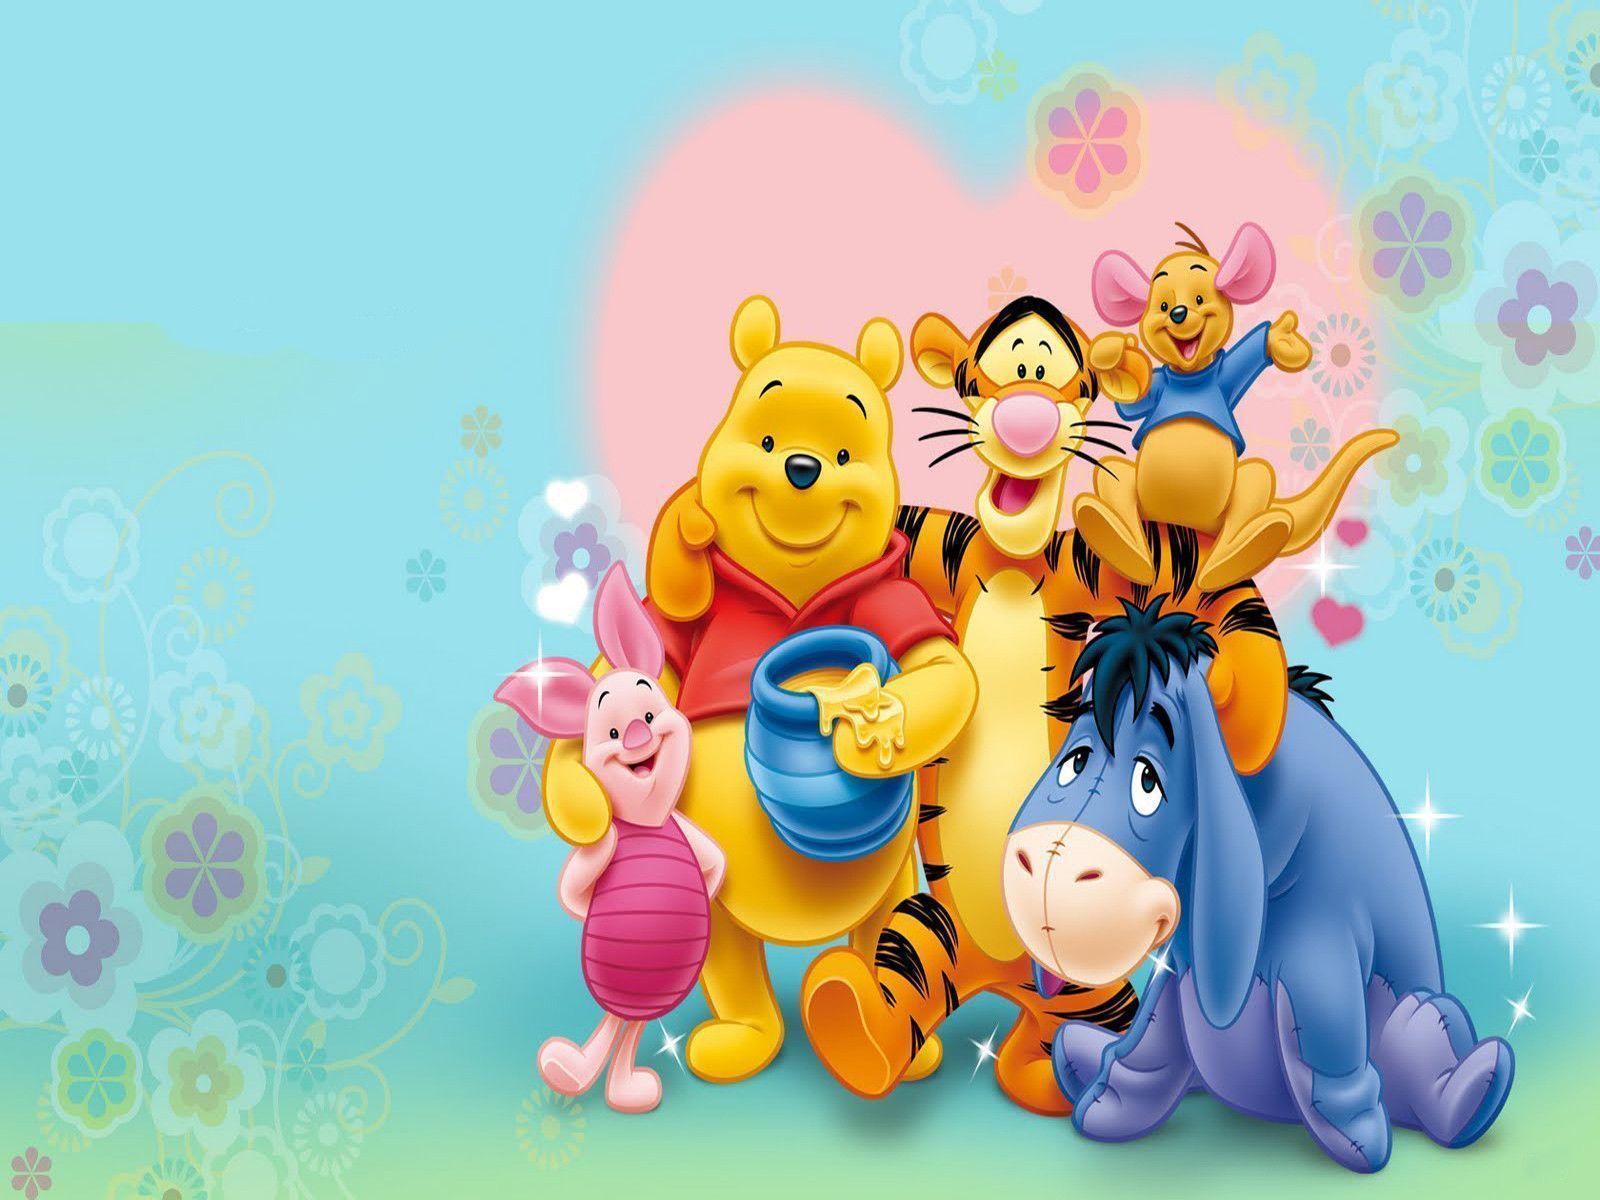 Xmas Stuff For > Winnie The Pooh Christmas Wallpaper Background